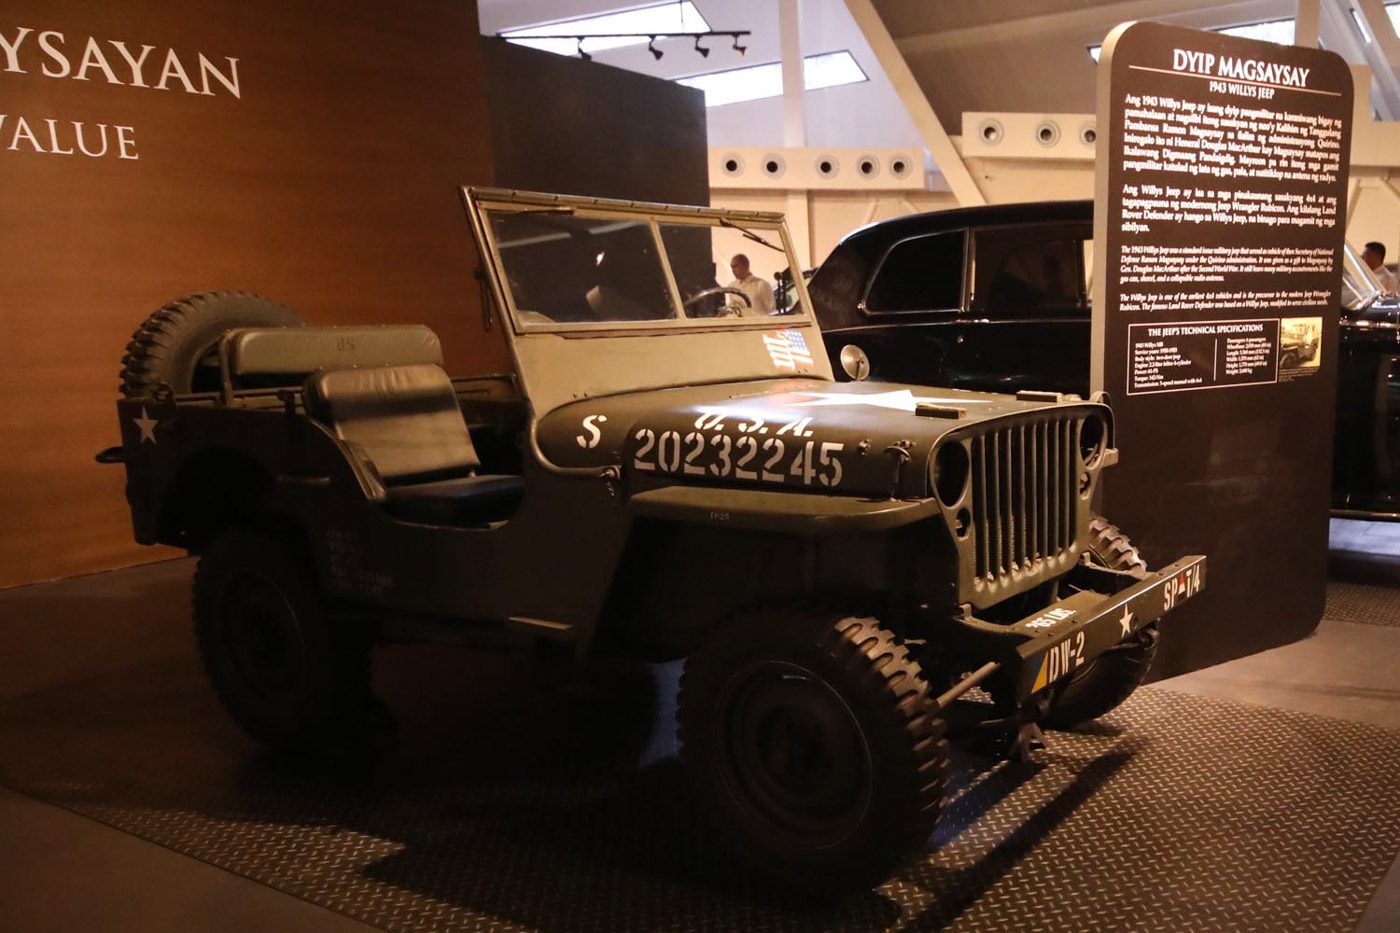 MAGSAYSAY. A 1943 Willys Jeep used by former president Ramon Magsaysay during his stint as defense secretary.   